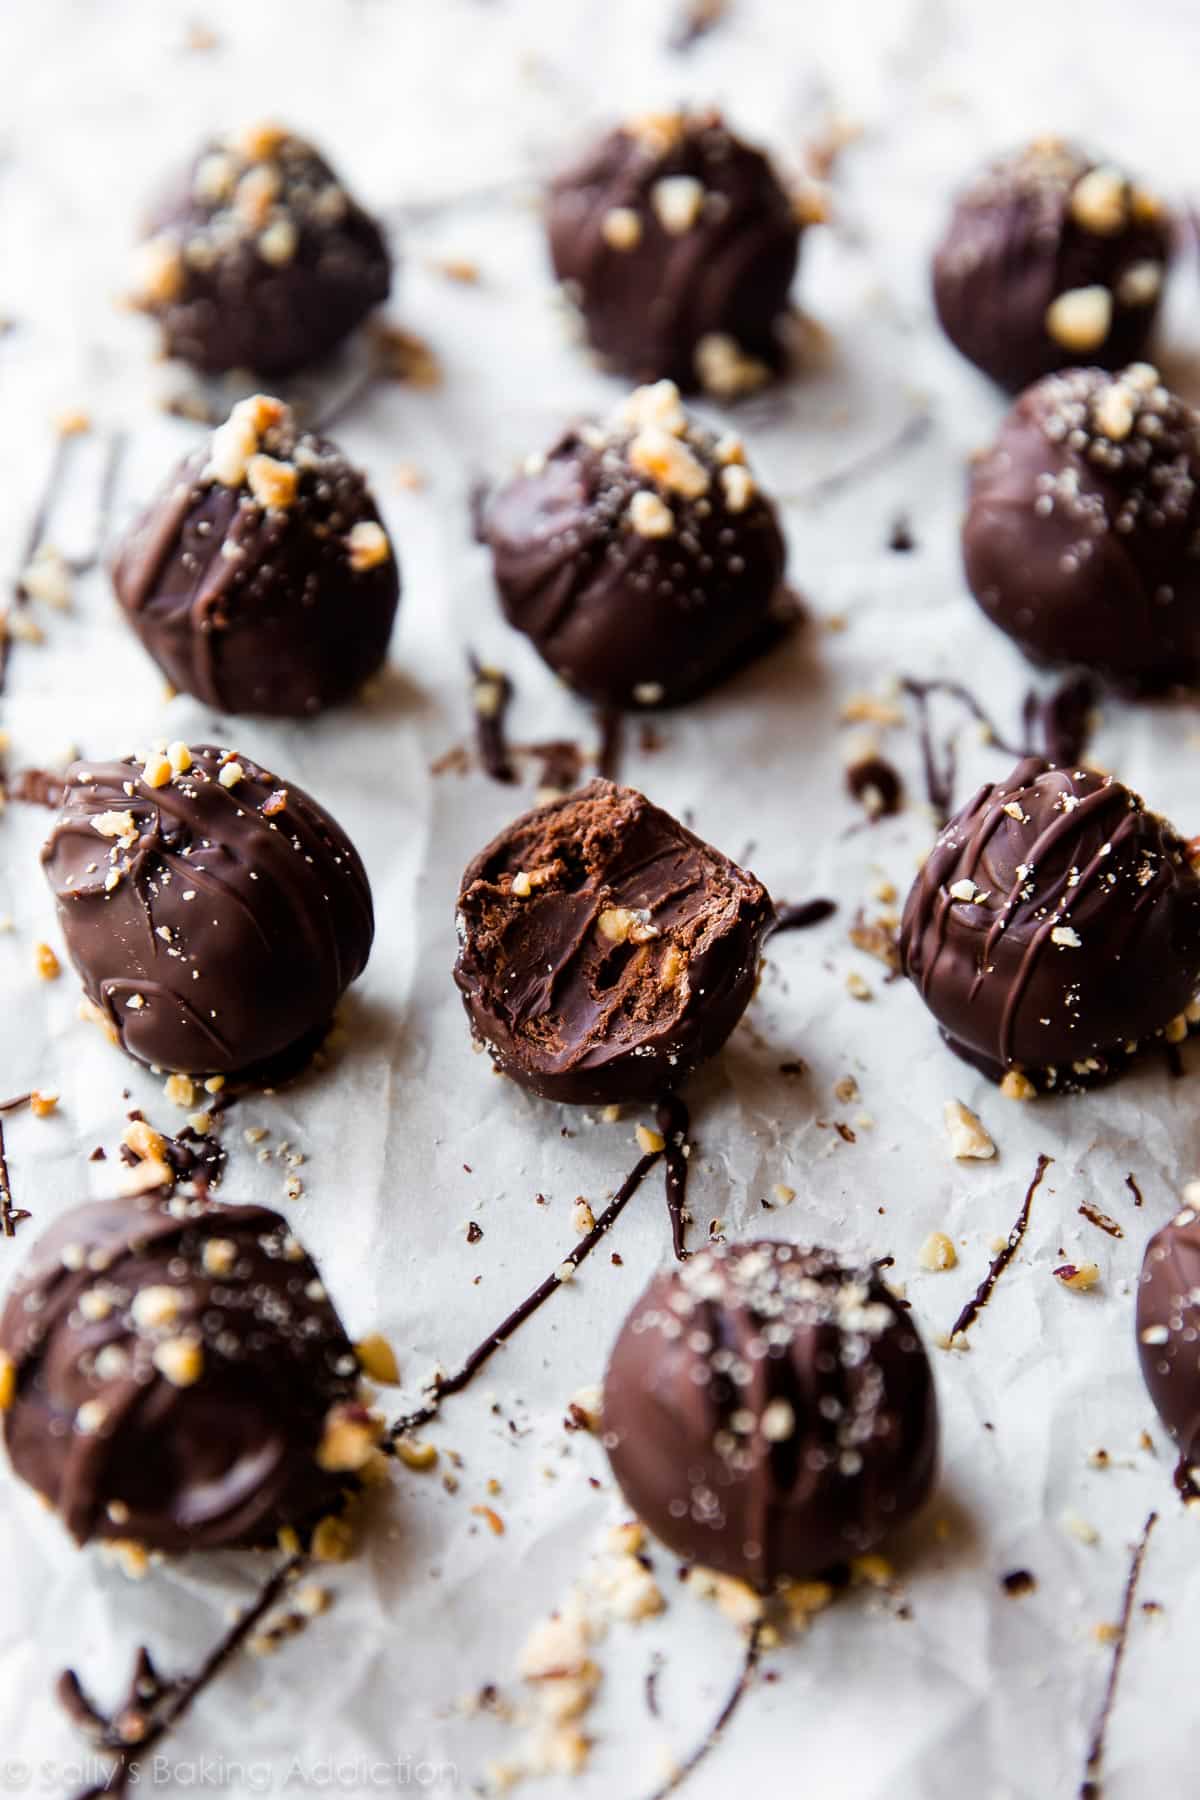 chocolate hazelnut crunch truffles on parchment paper with a bite taken from one showing the inside